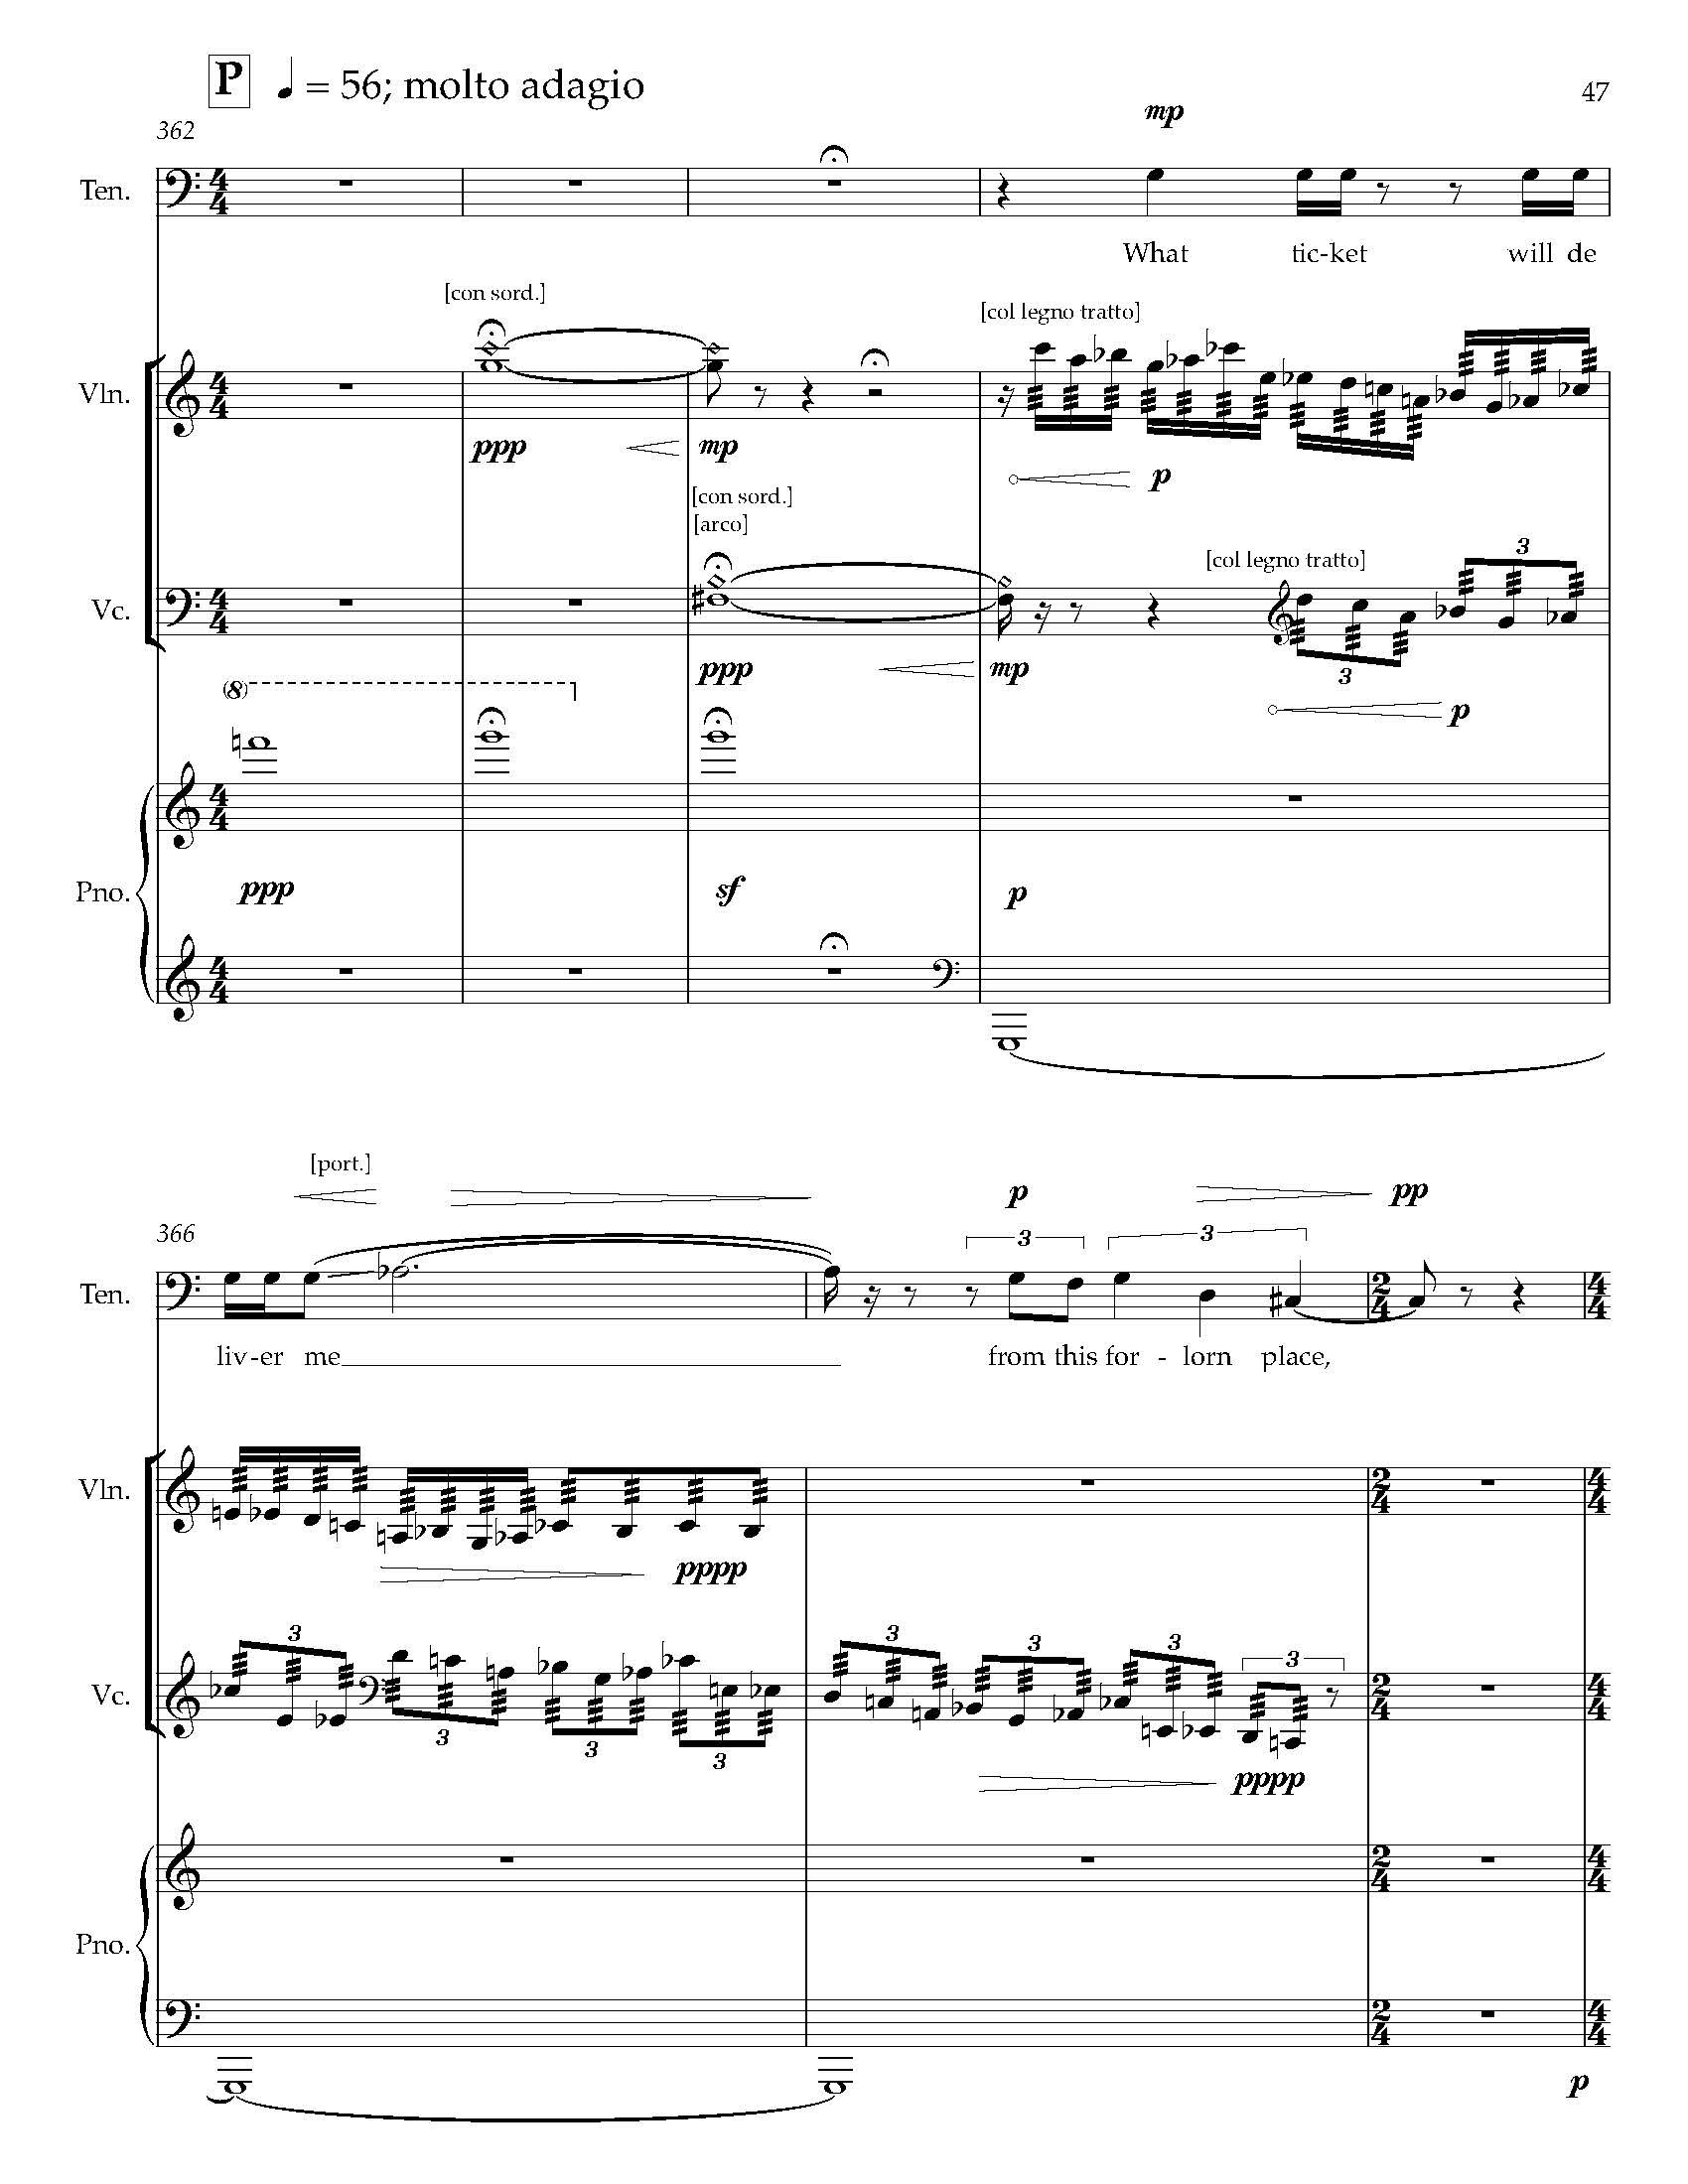 Gursky Songs - Complete Score_Page_55.jpg